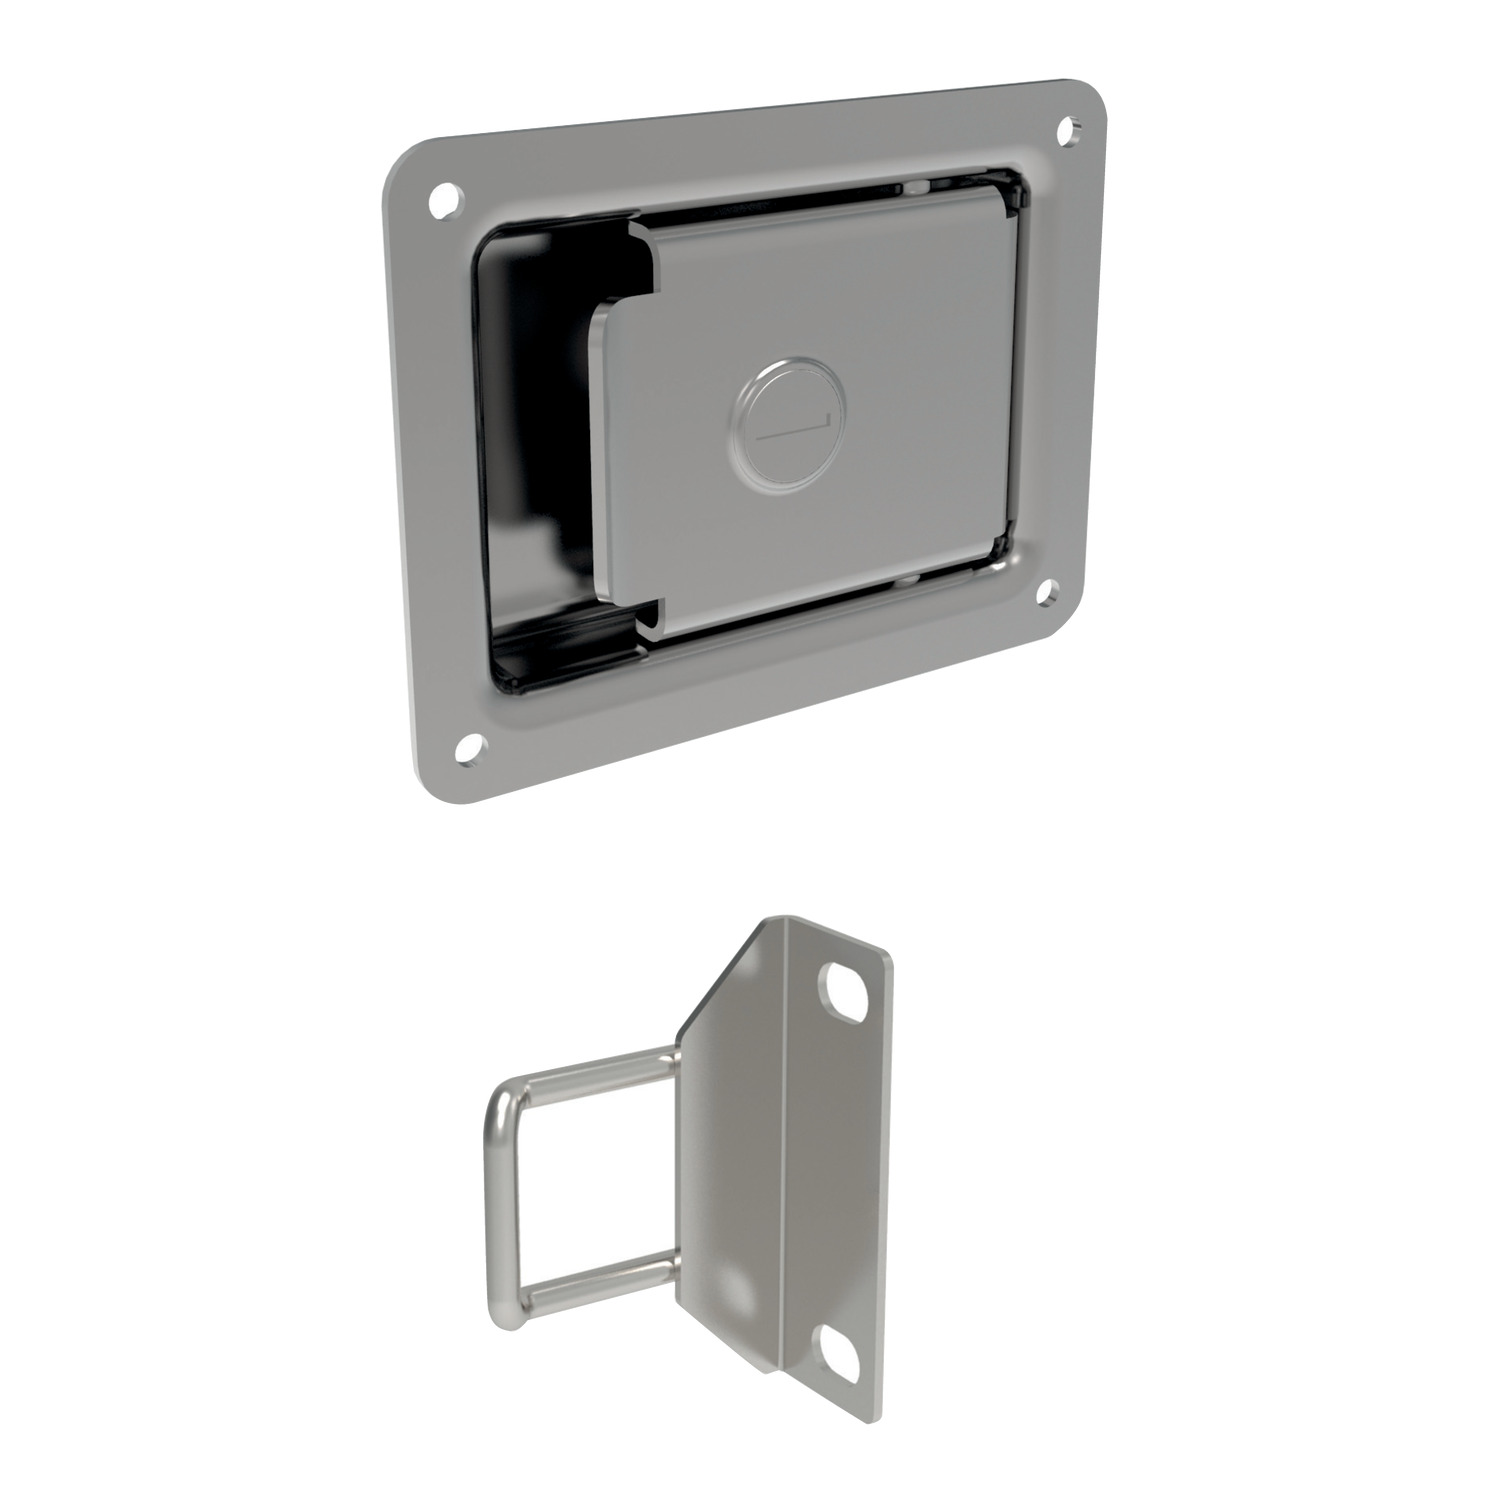 Product B4756, Push To Close Paddle Latches pull to open - slam action - standard cylinder lock - steel or stainless / 